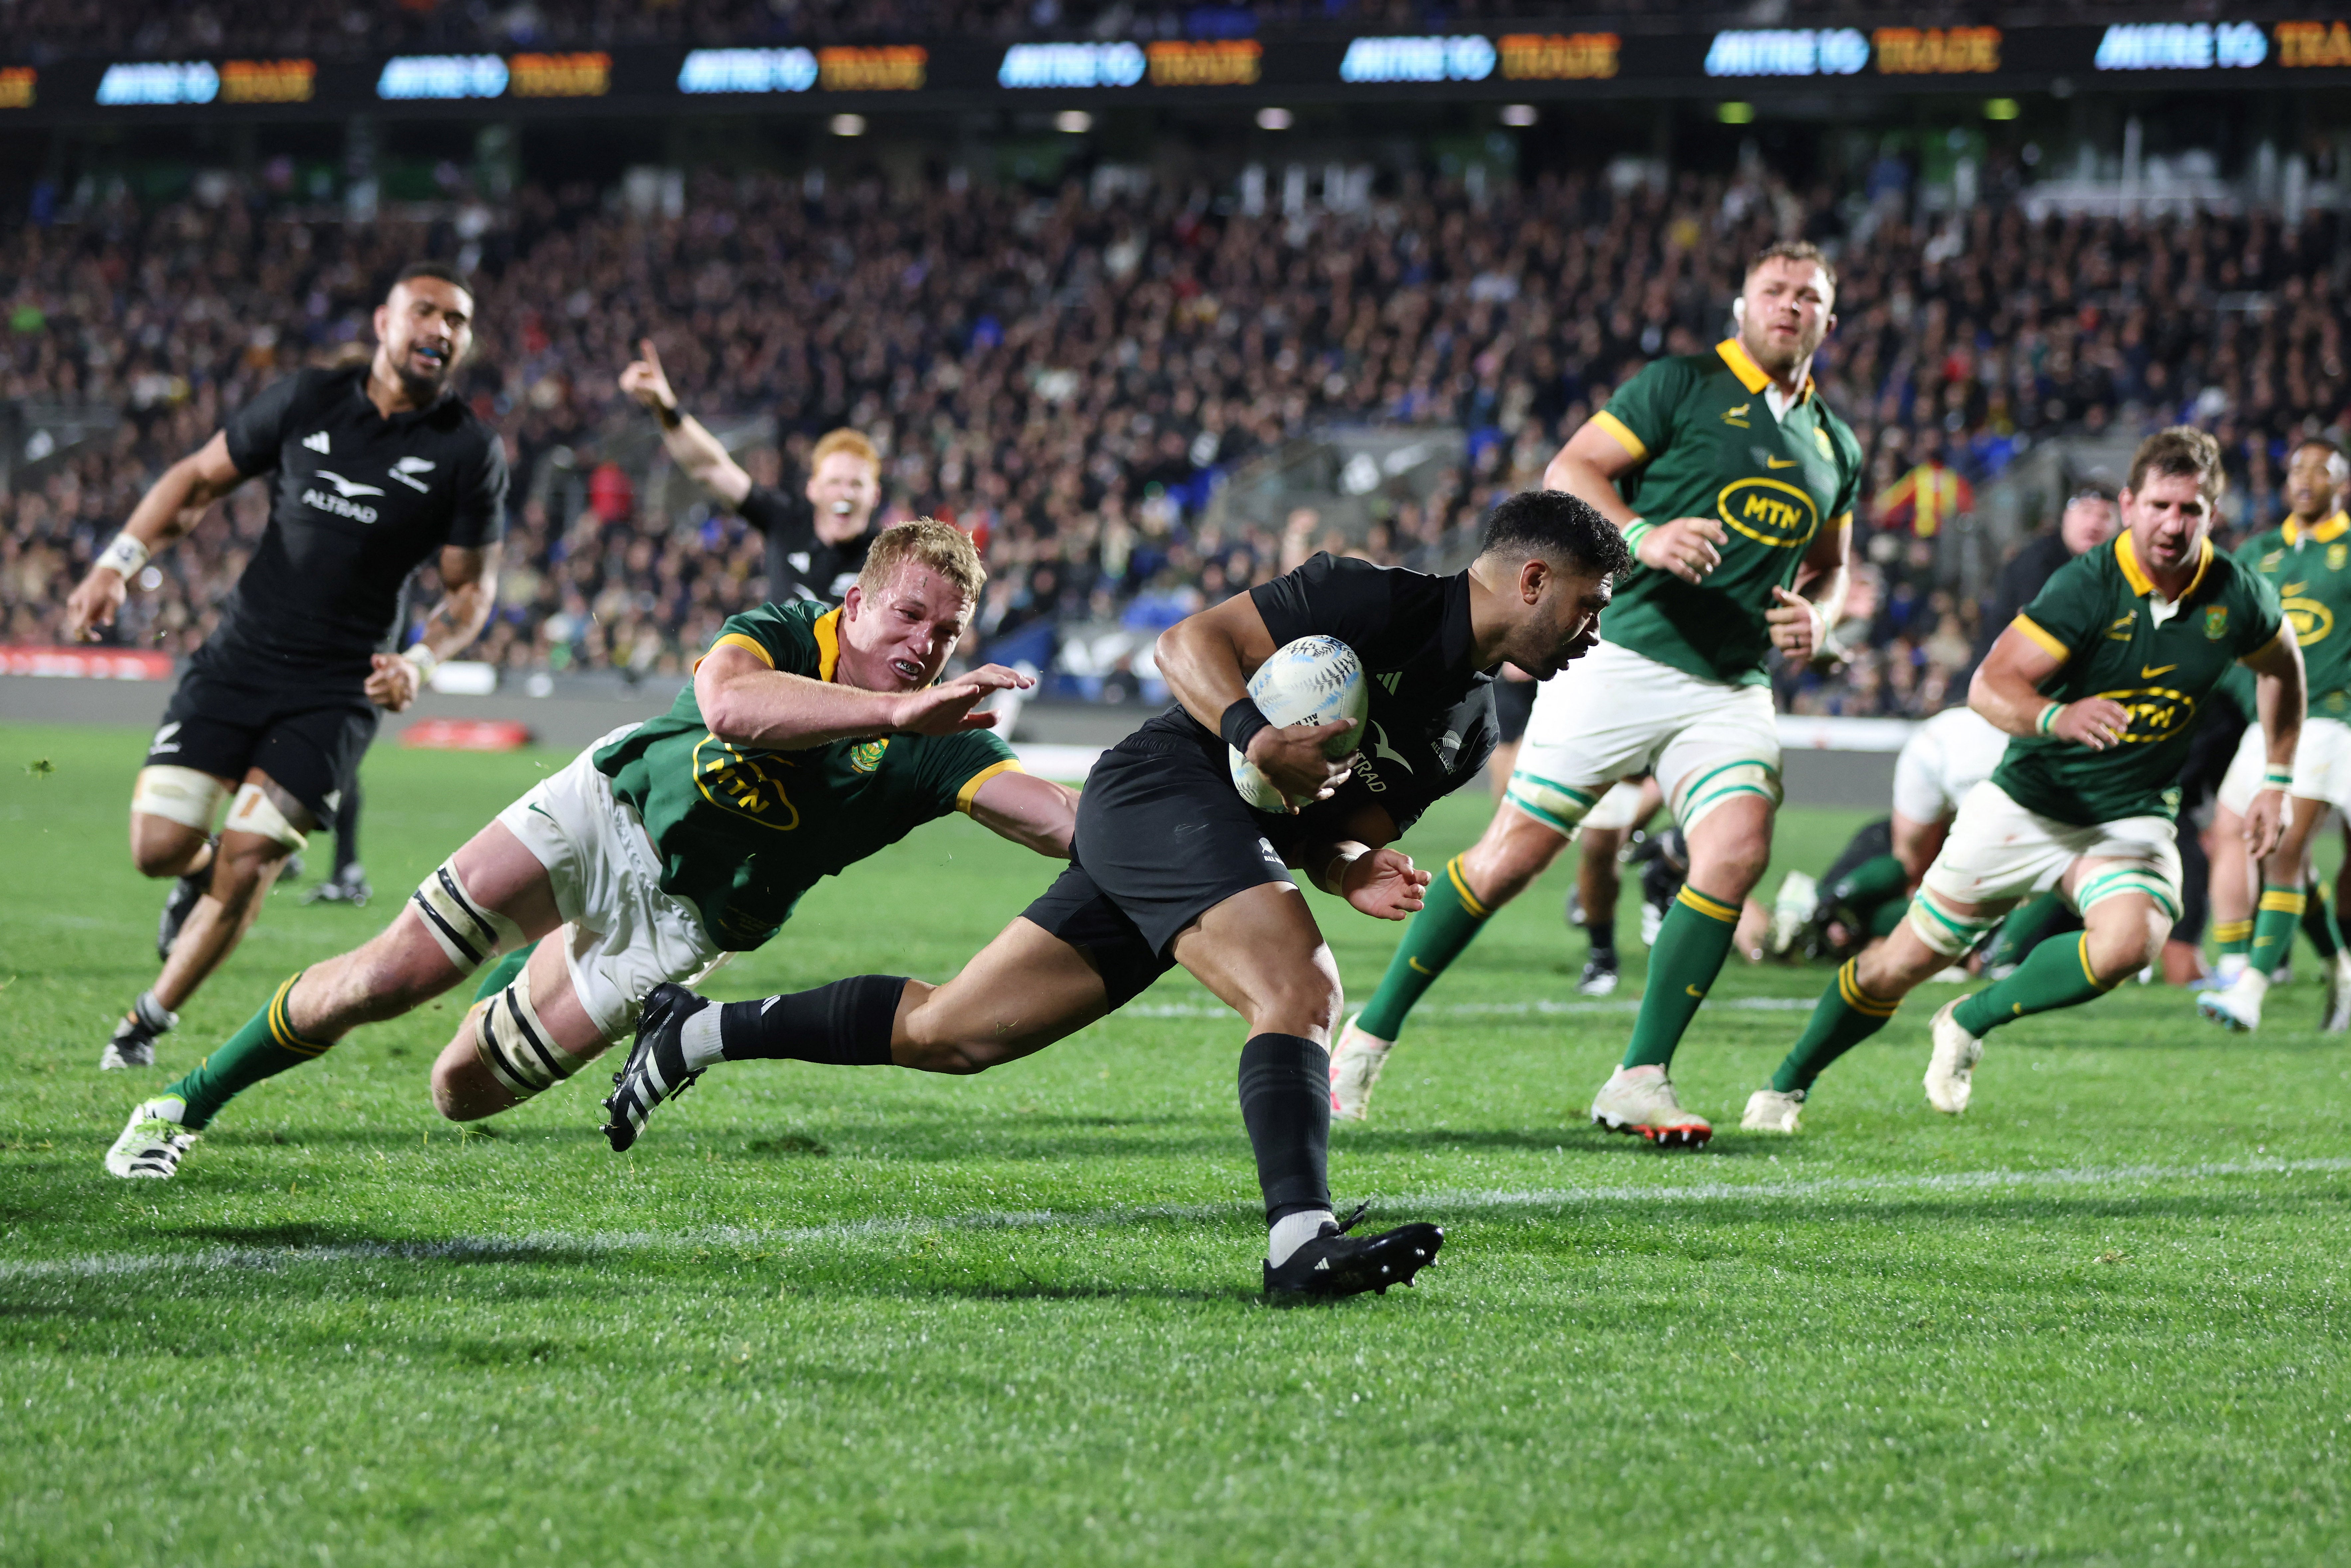 Richie Mo’unga starred for the All Blacks